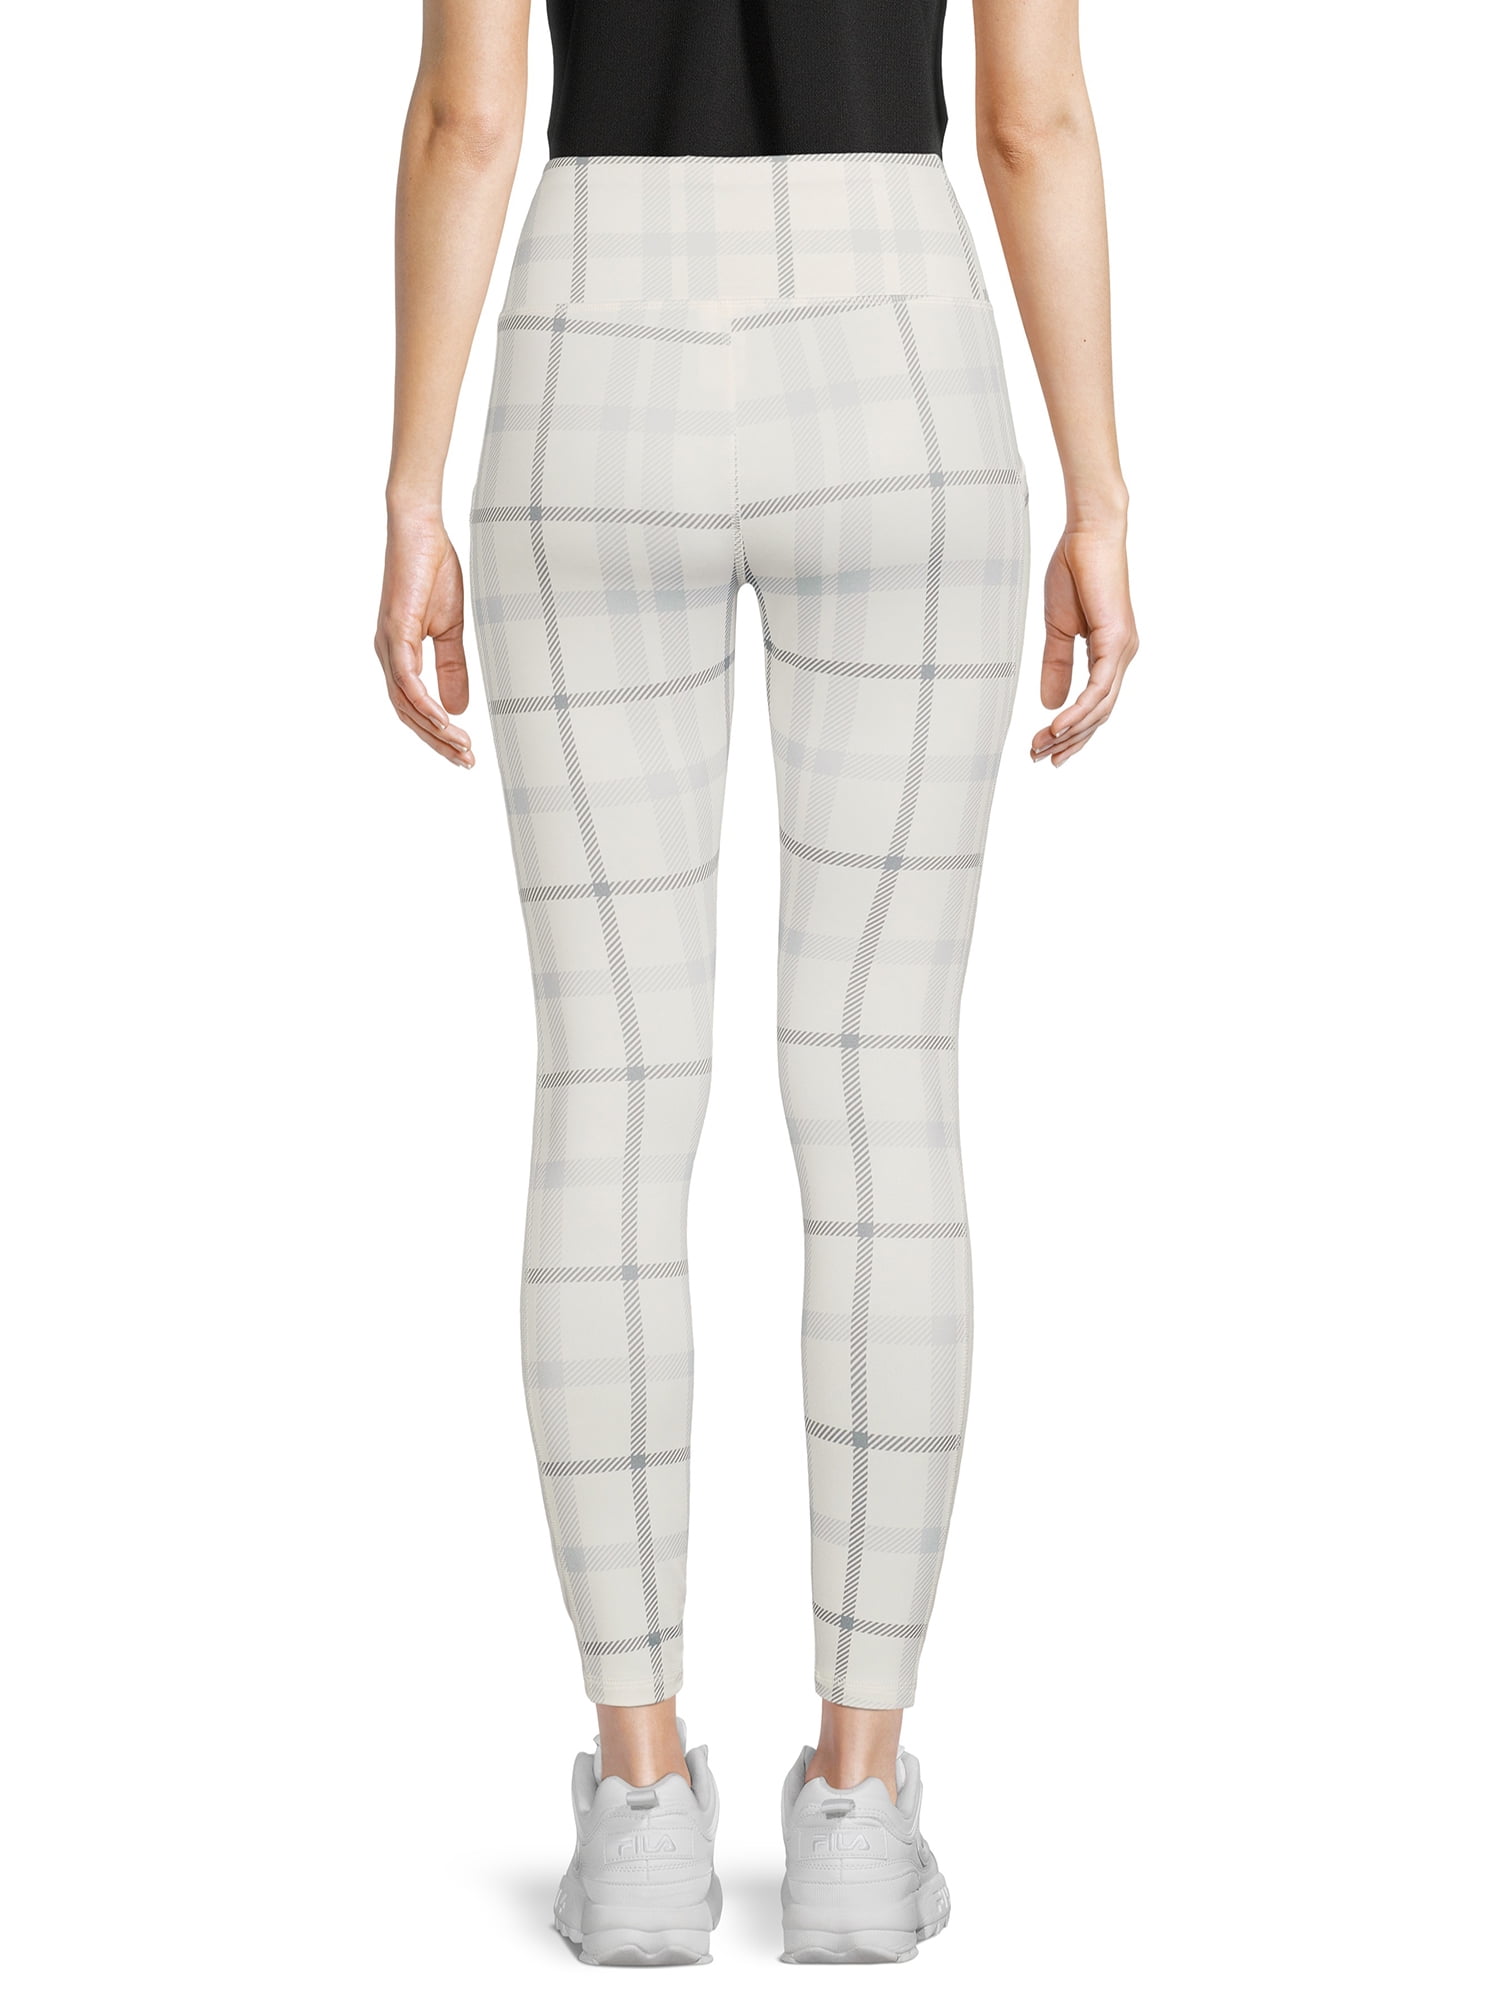 Avia, Pants & Jumpsuits, Avia Womens Brushed Leggings With Zipper Pockets  Pale Ice